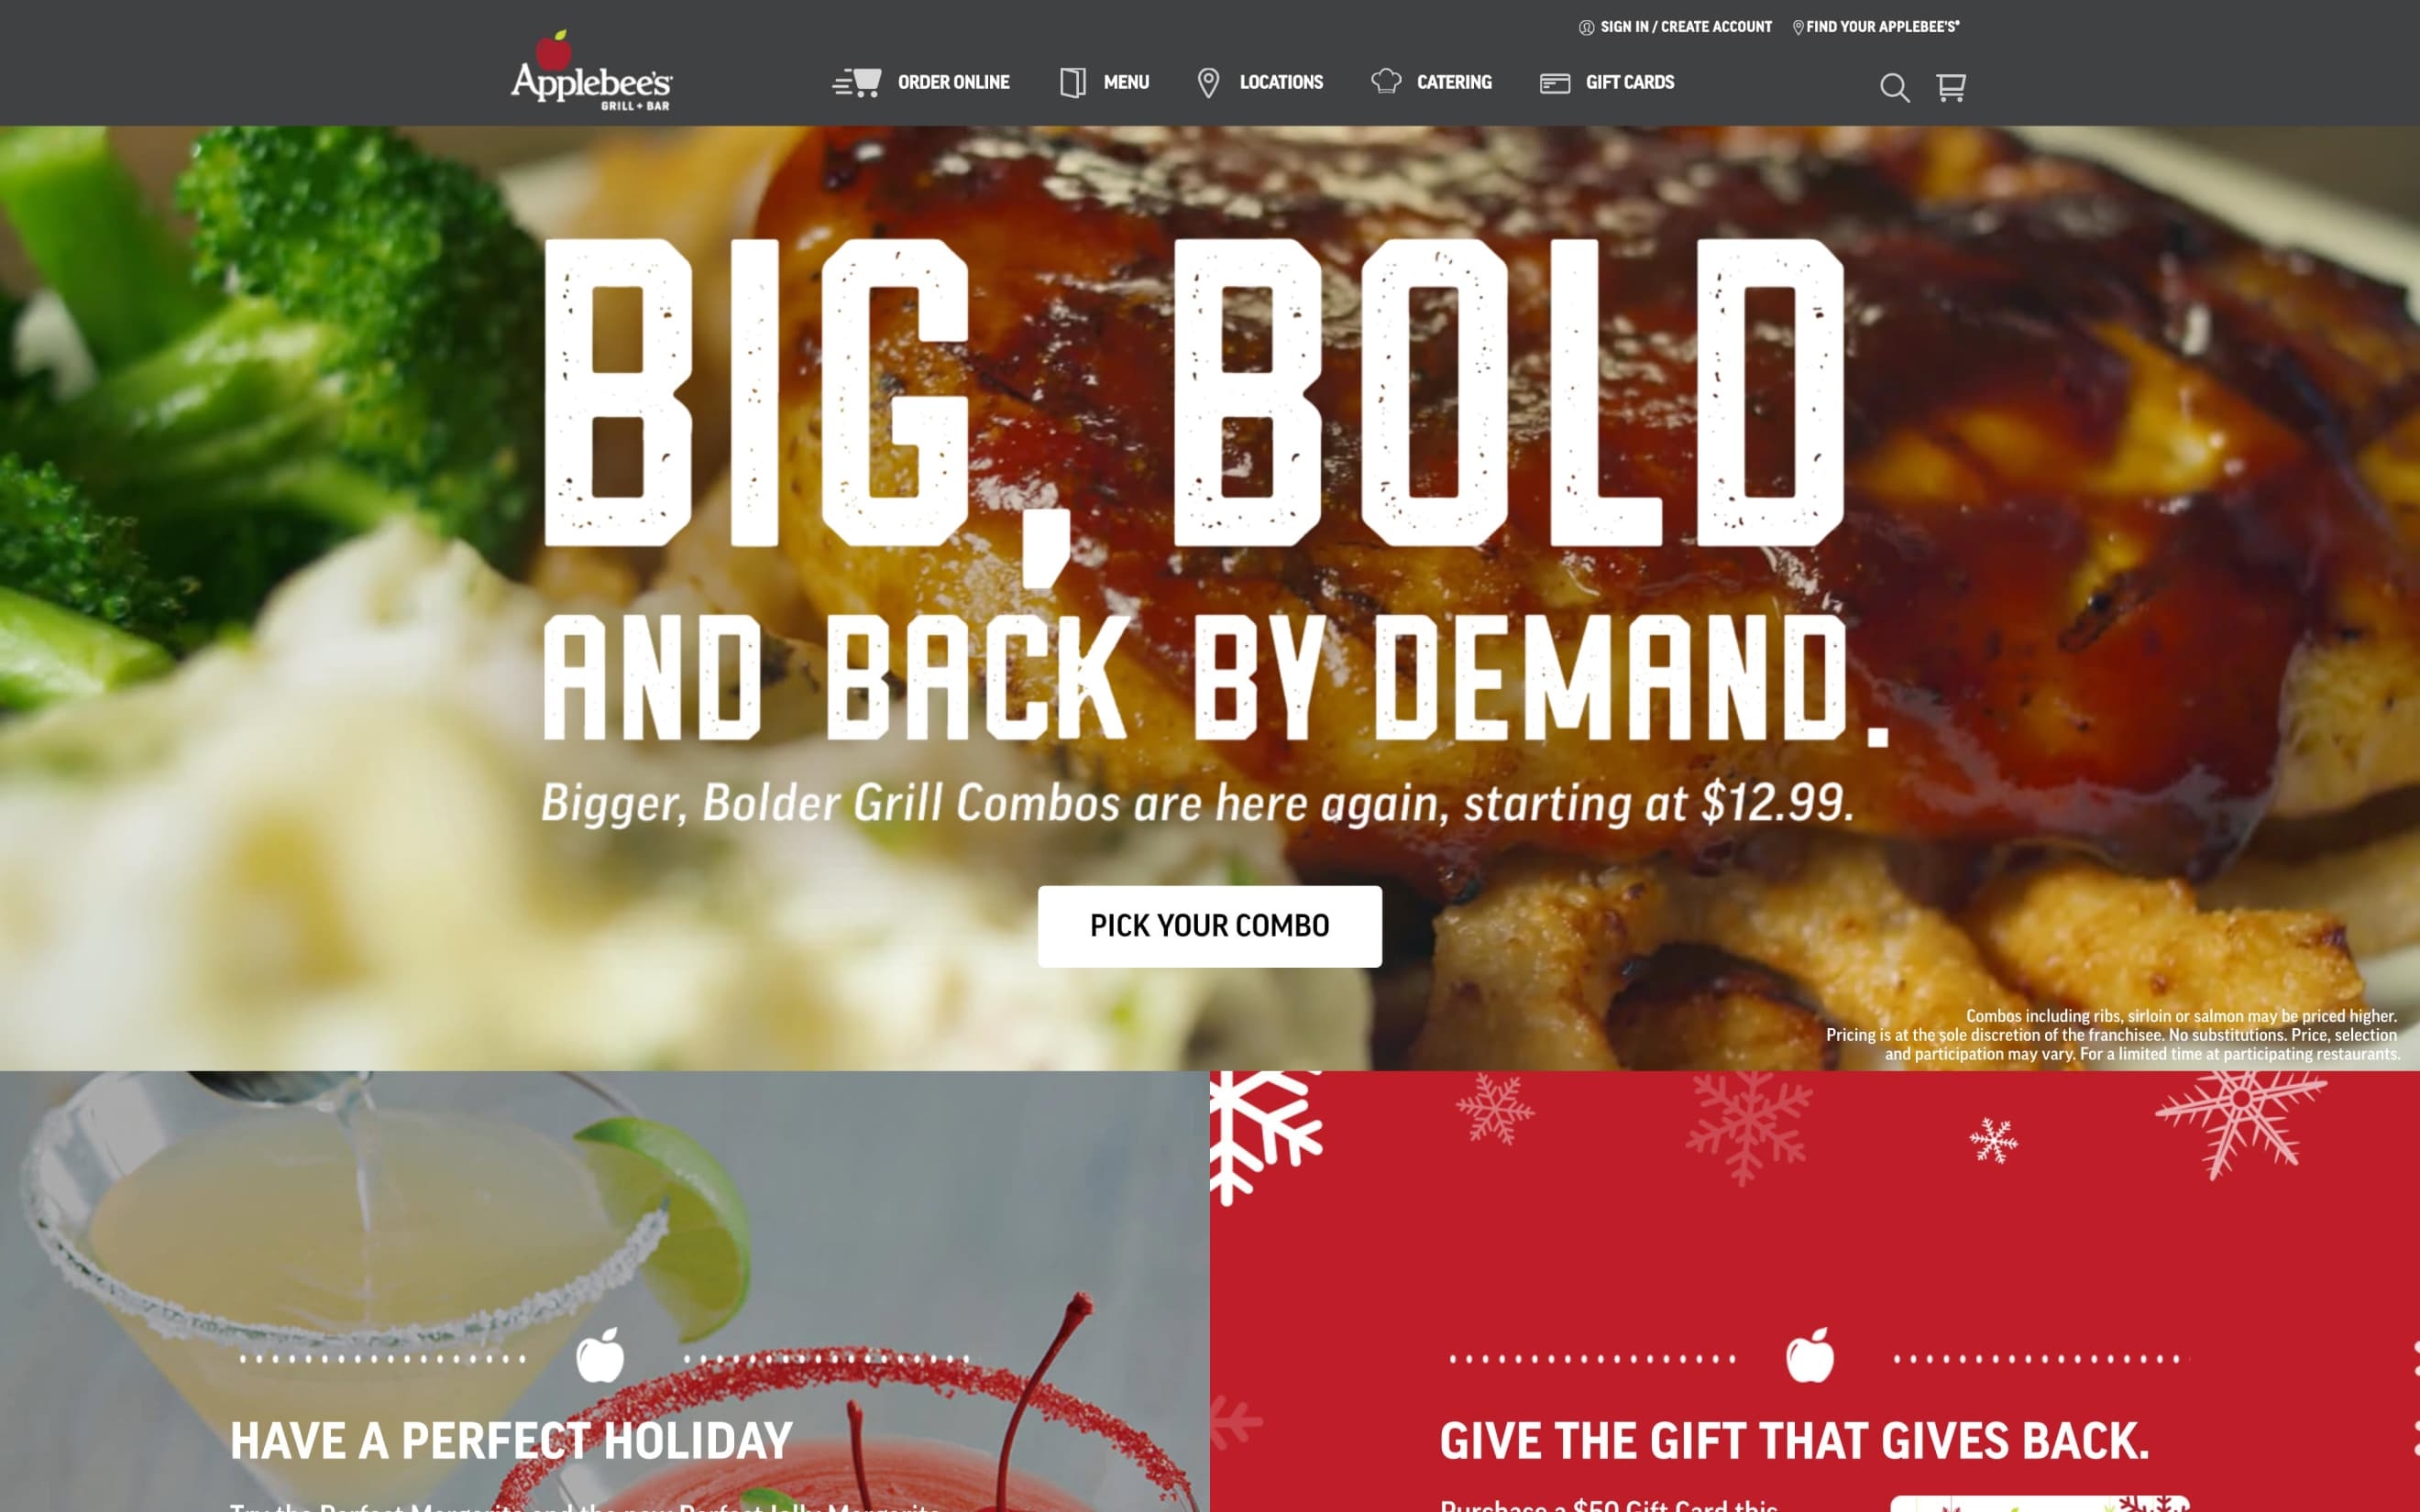 Applebee's promotional banner featuring a dish with broccoli and mashed potatoes, text reads "Big, Bold and Back By Demand." Below, there are images promoting holiday gifts and cocktails. Visit the Applebee's website designed by ArcTouch for more details.